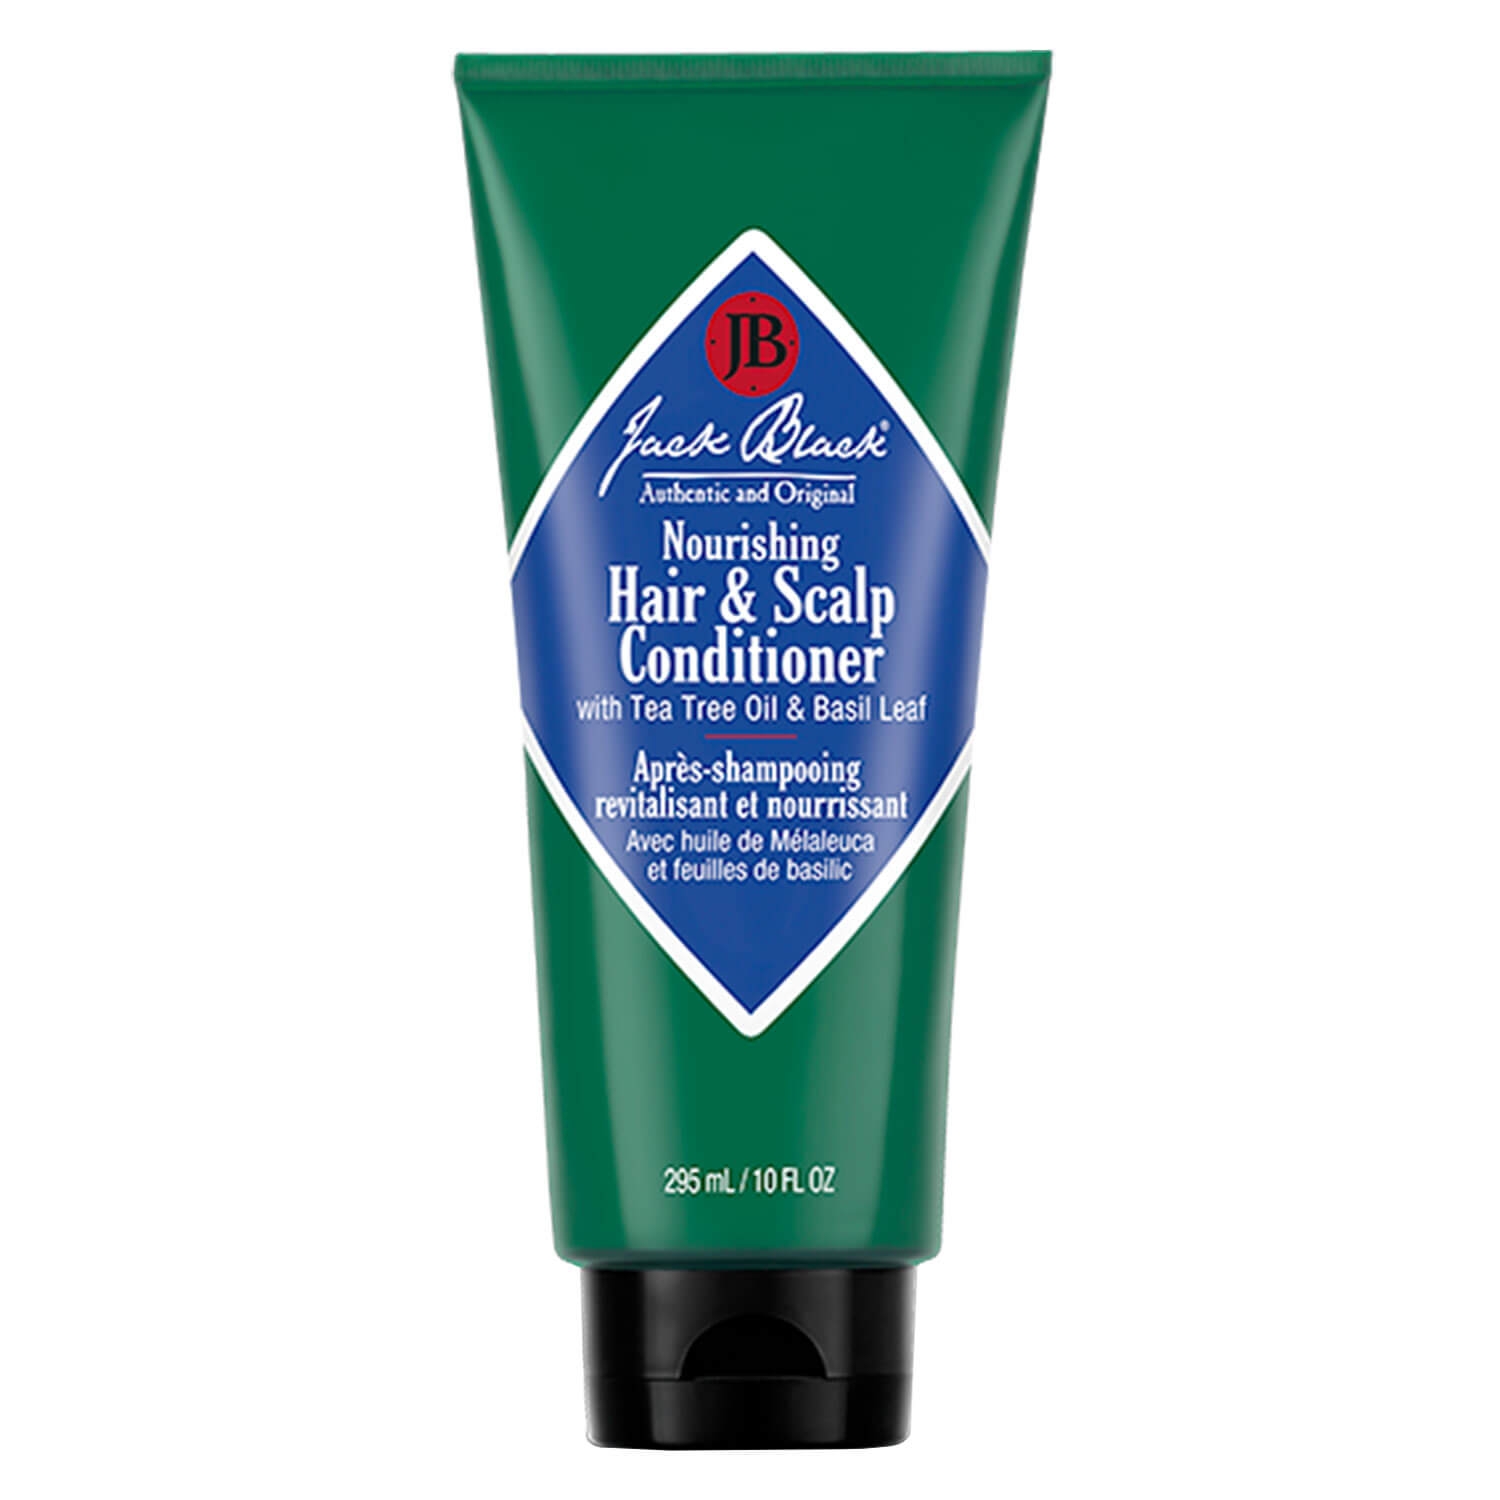 Product image from Jack Black - Nourishing Hair & Scalp Conditioner